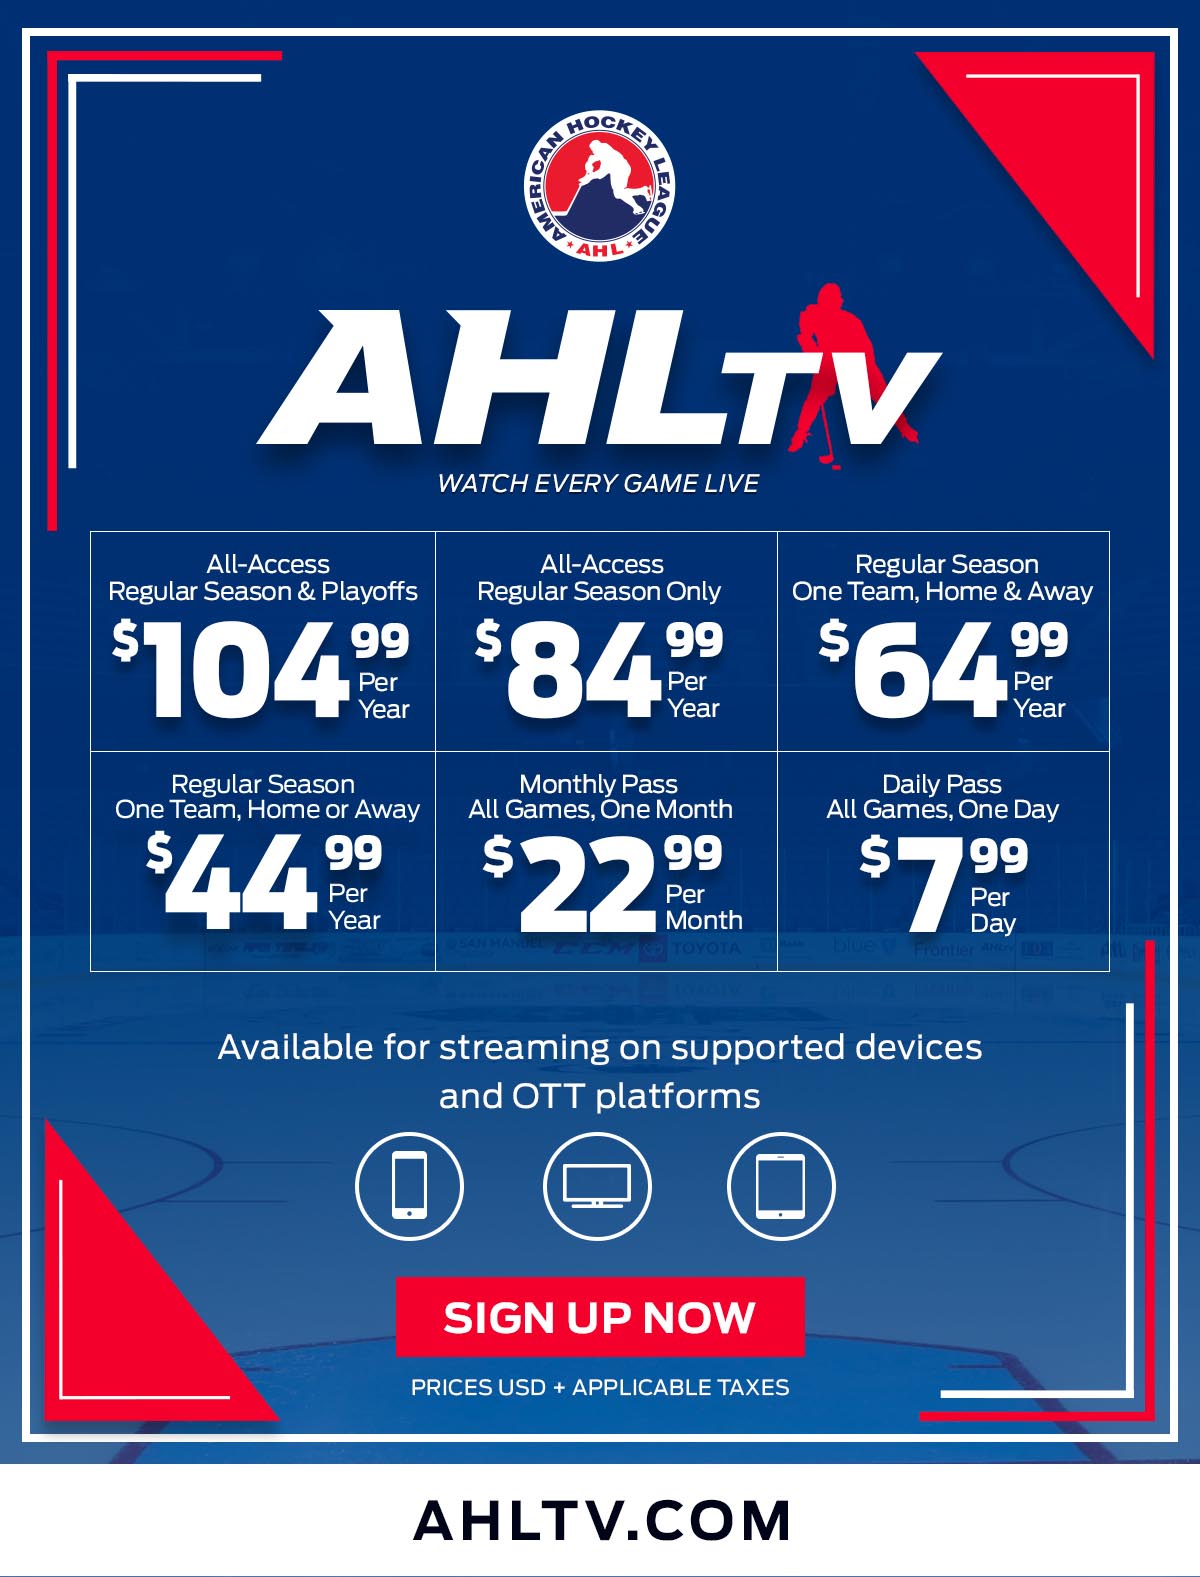 AHLTV freeview set for opening weekend TheAHL The American Hockey League